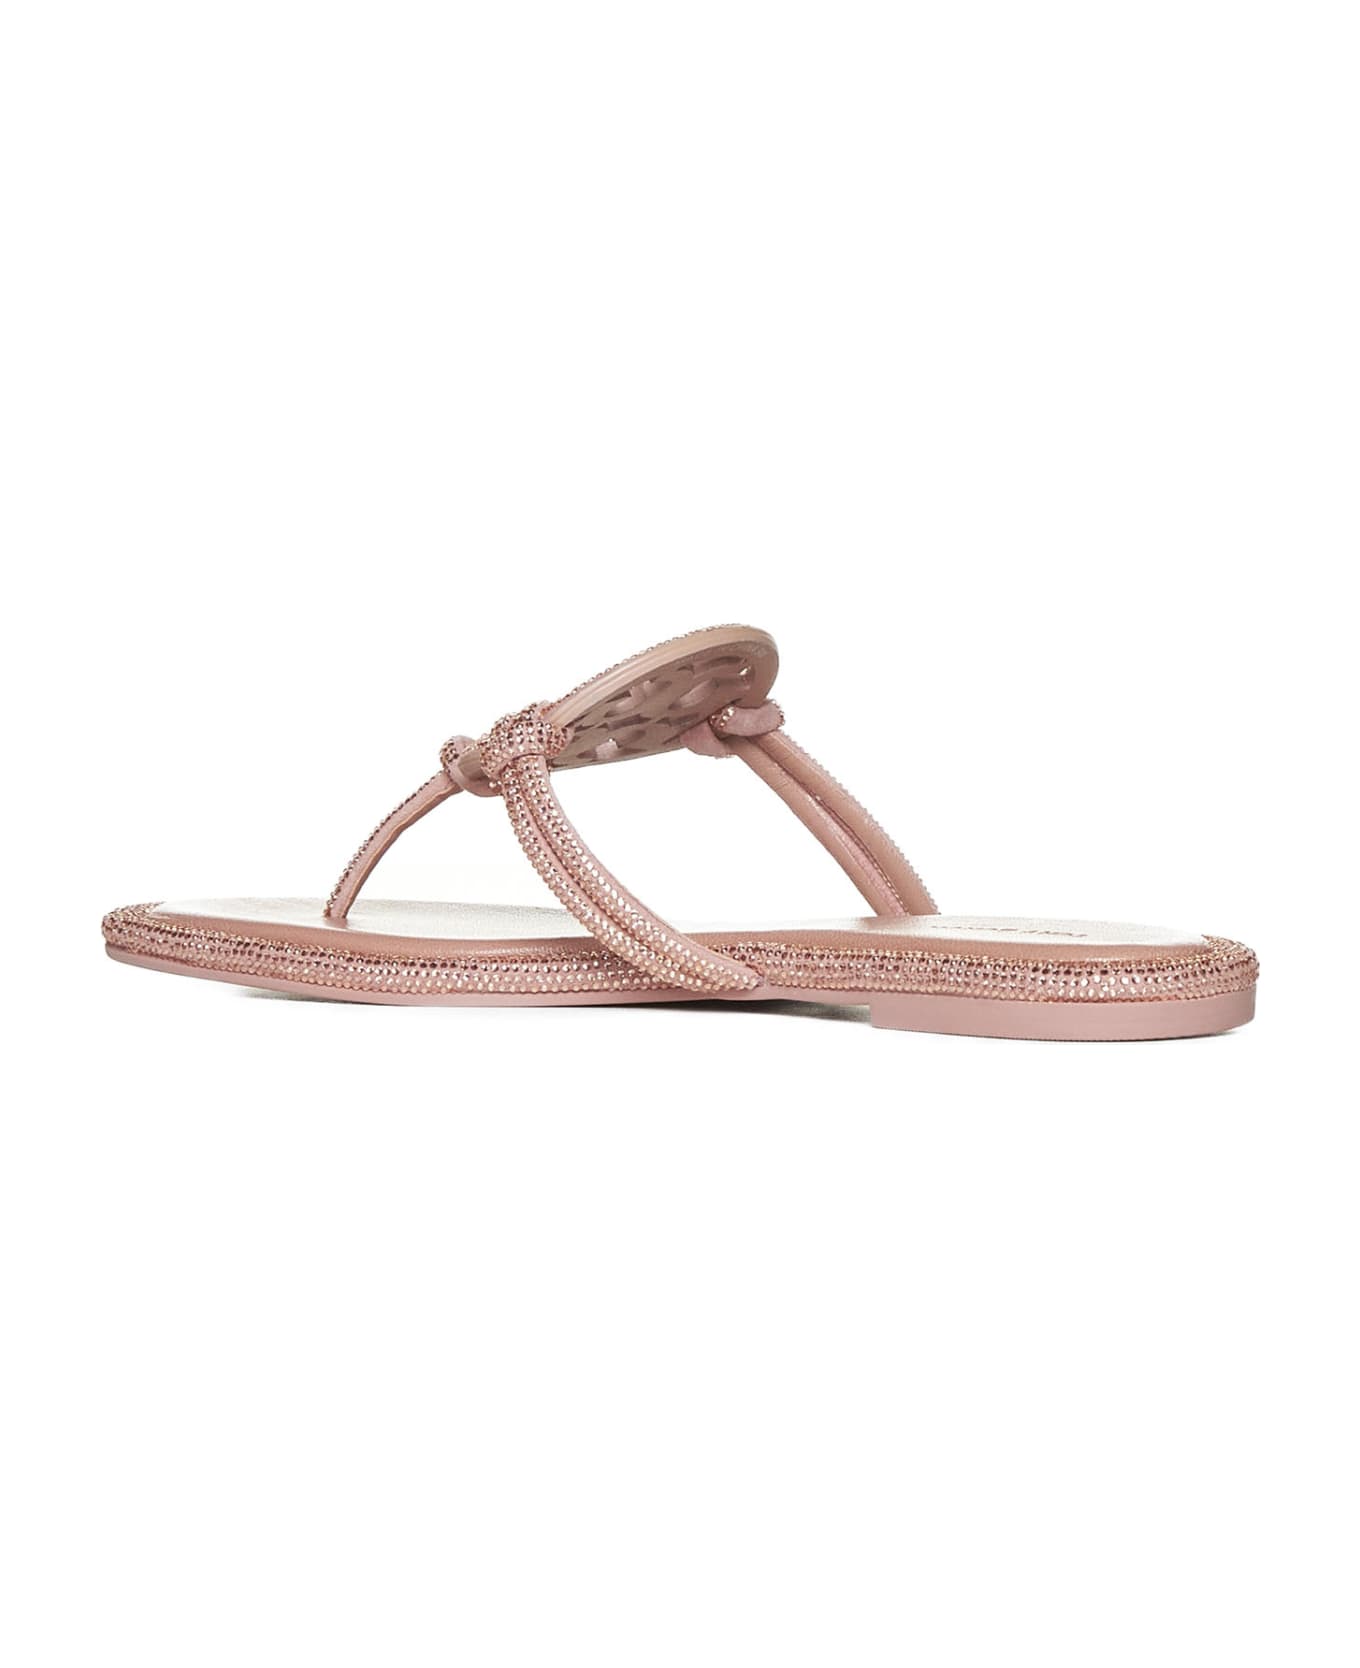 Tory Burch Miller Knotted Pave Embellished Sandals - Pink